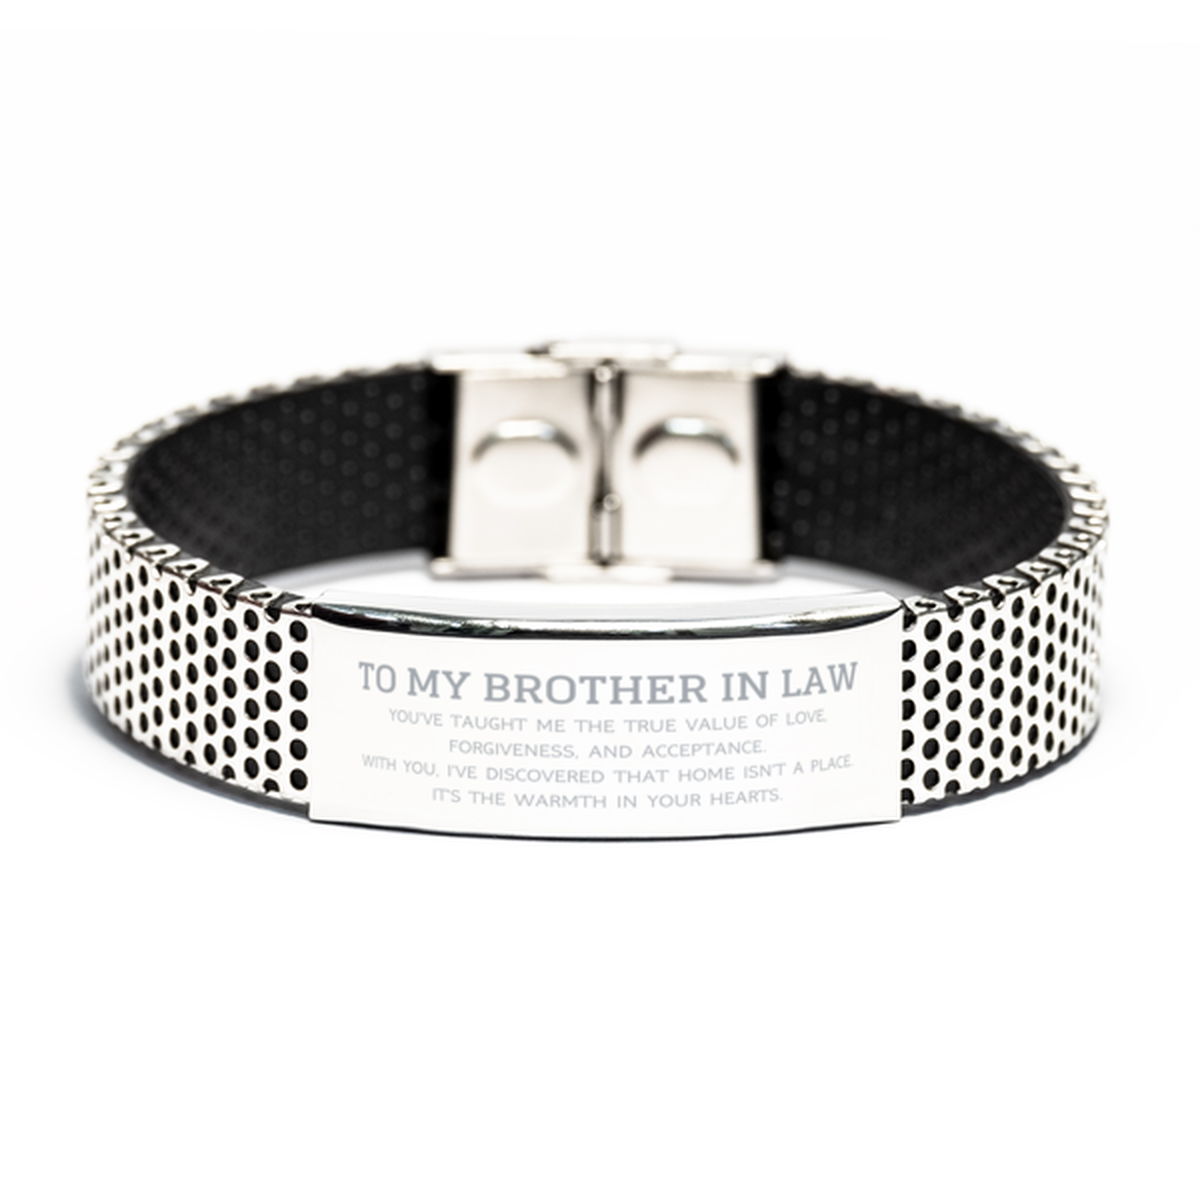 To My Brother In Law Gifts, You've taught me the true value of love, Thank You Gifts For Brother In Law, Birthday Stainless Steel Bracelet For Brother In Law